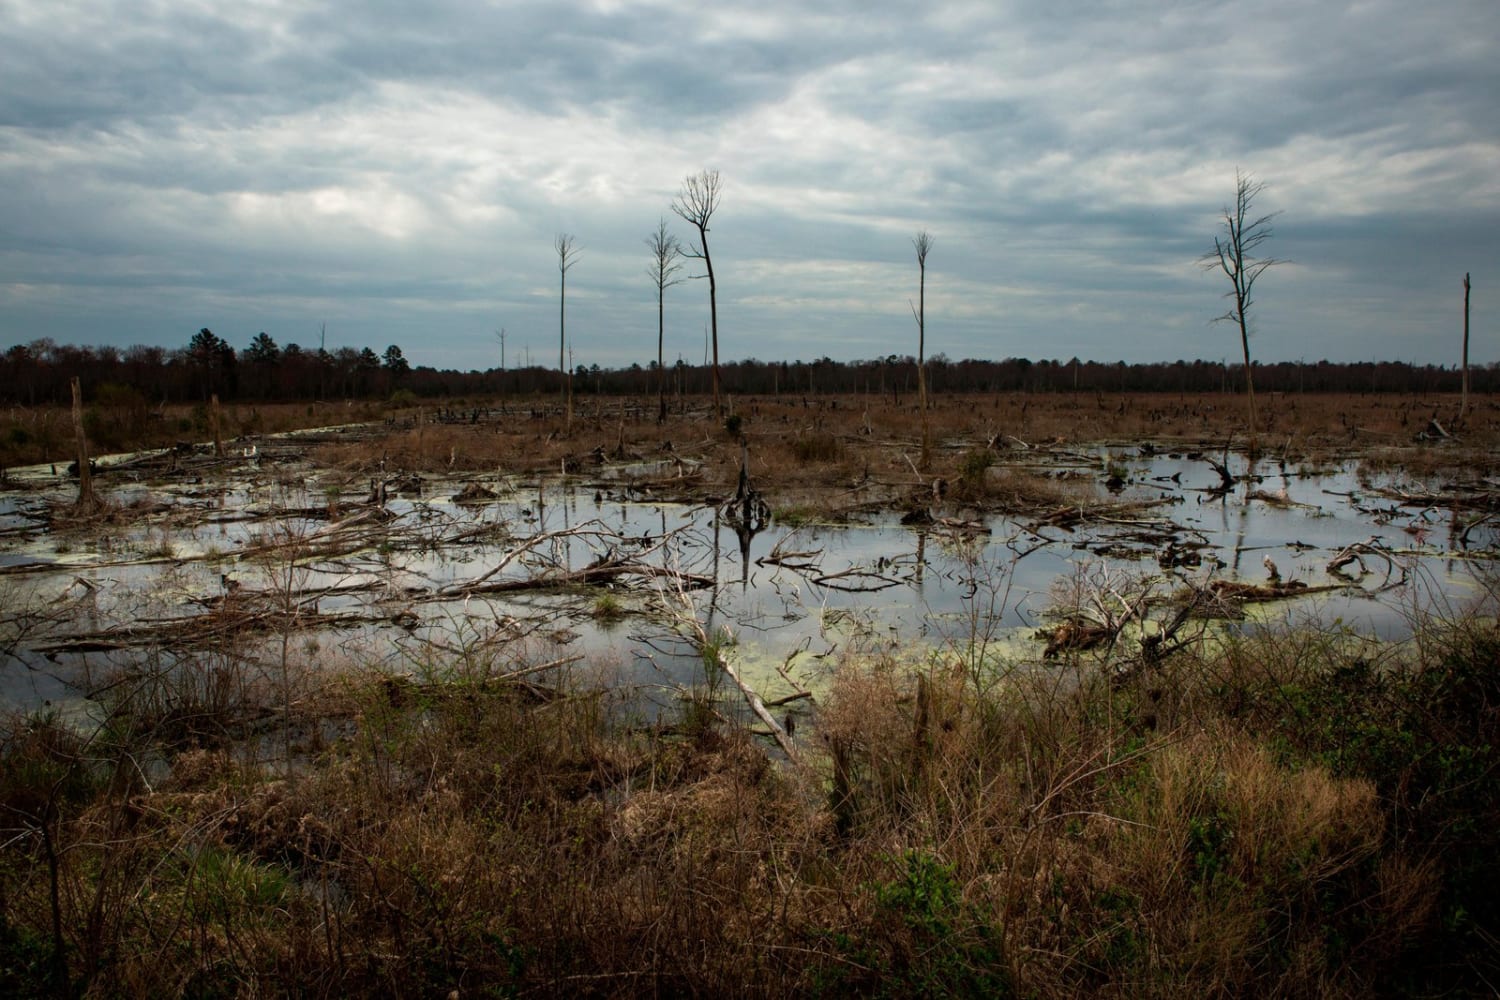 Deep in the Swamps, Archaeologists Are Finding How Fugitive Slaves Kept Their Freedom